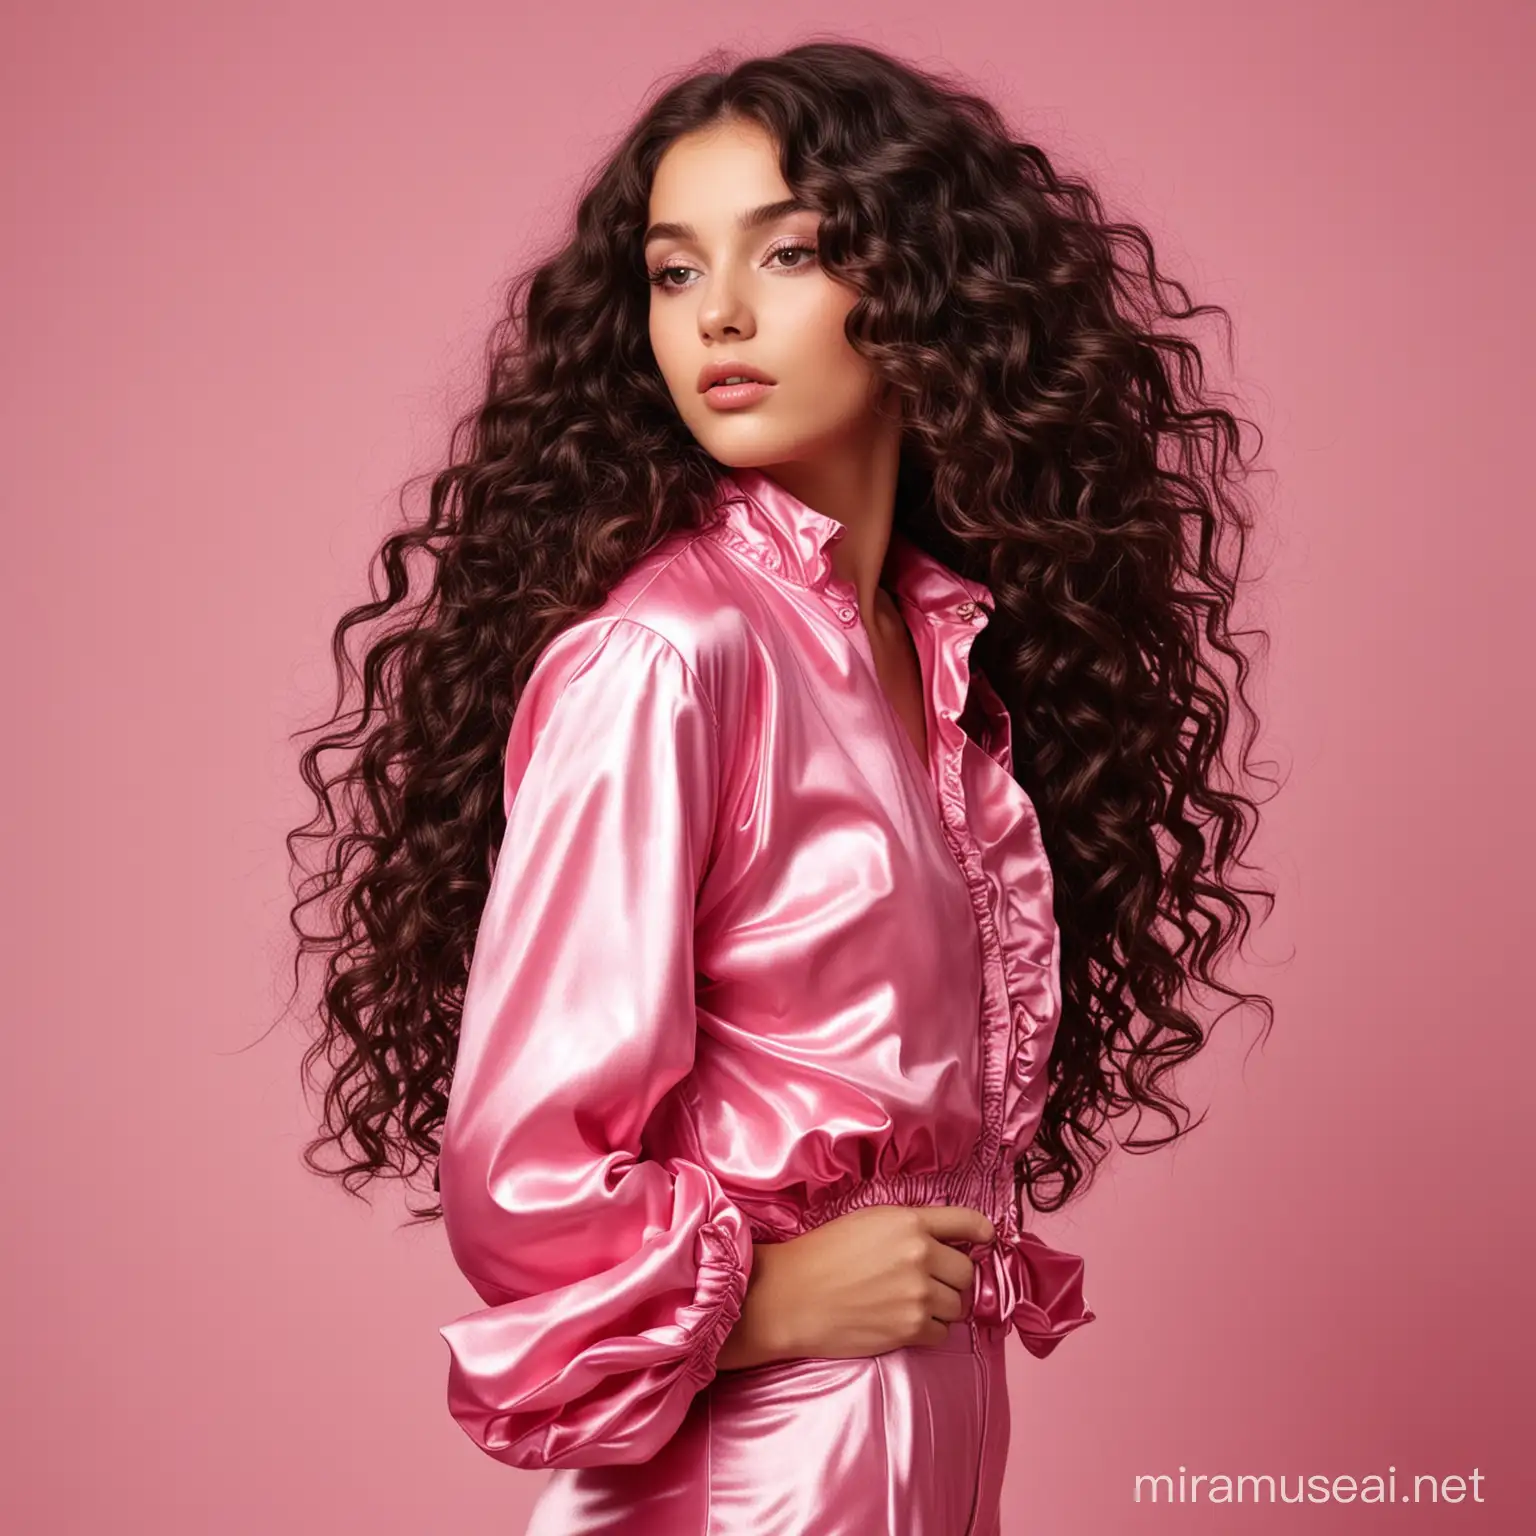 girl model looking sideways with long curly dark hair with pink shiny clothes